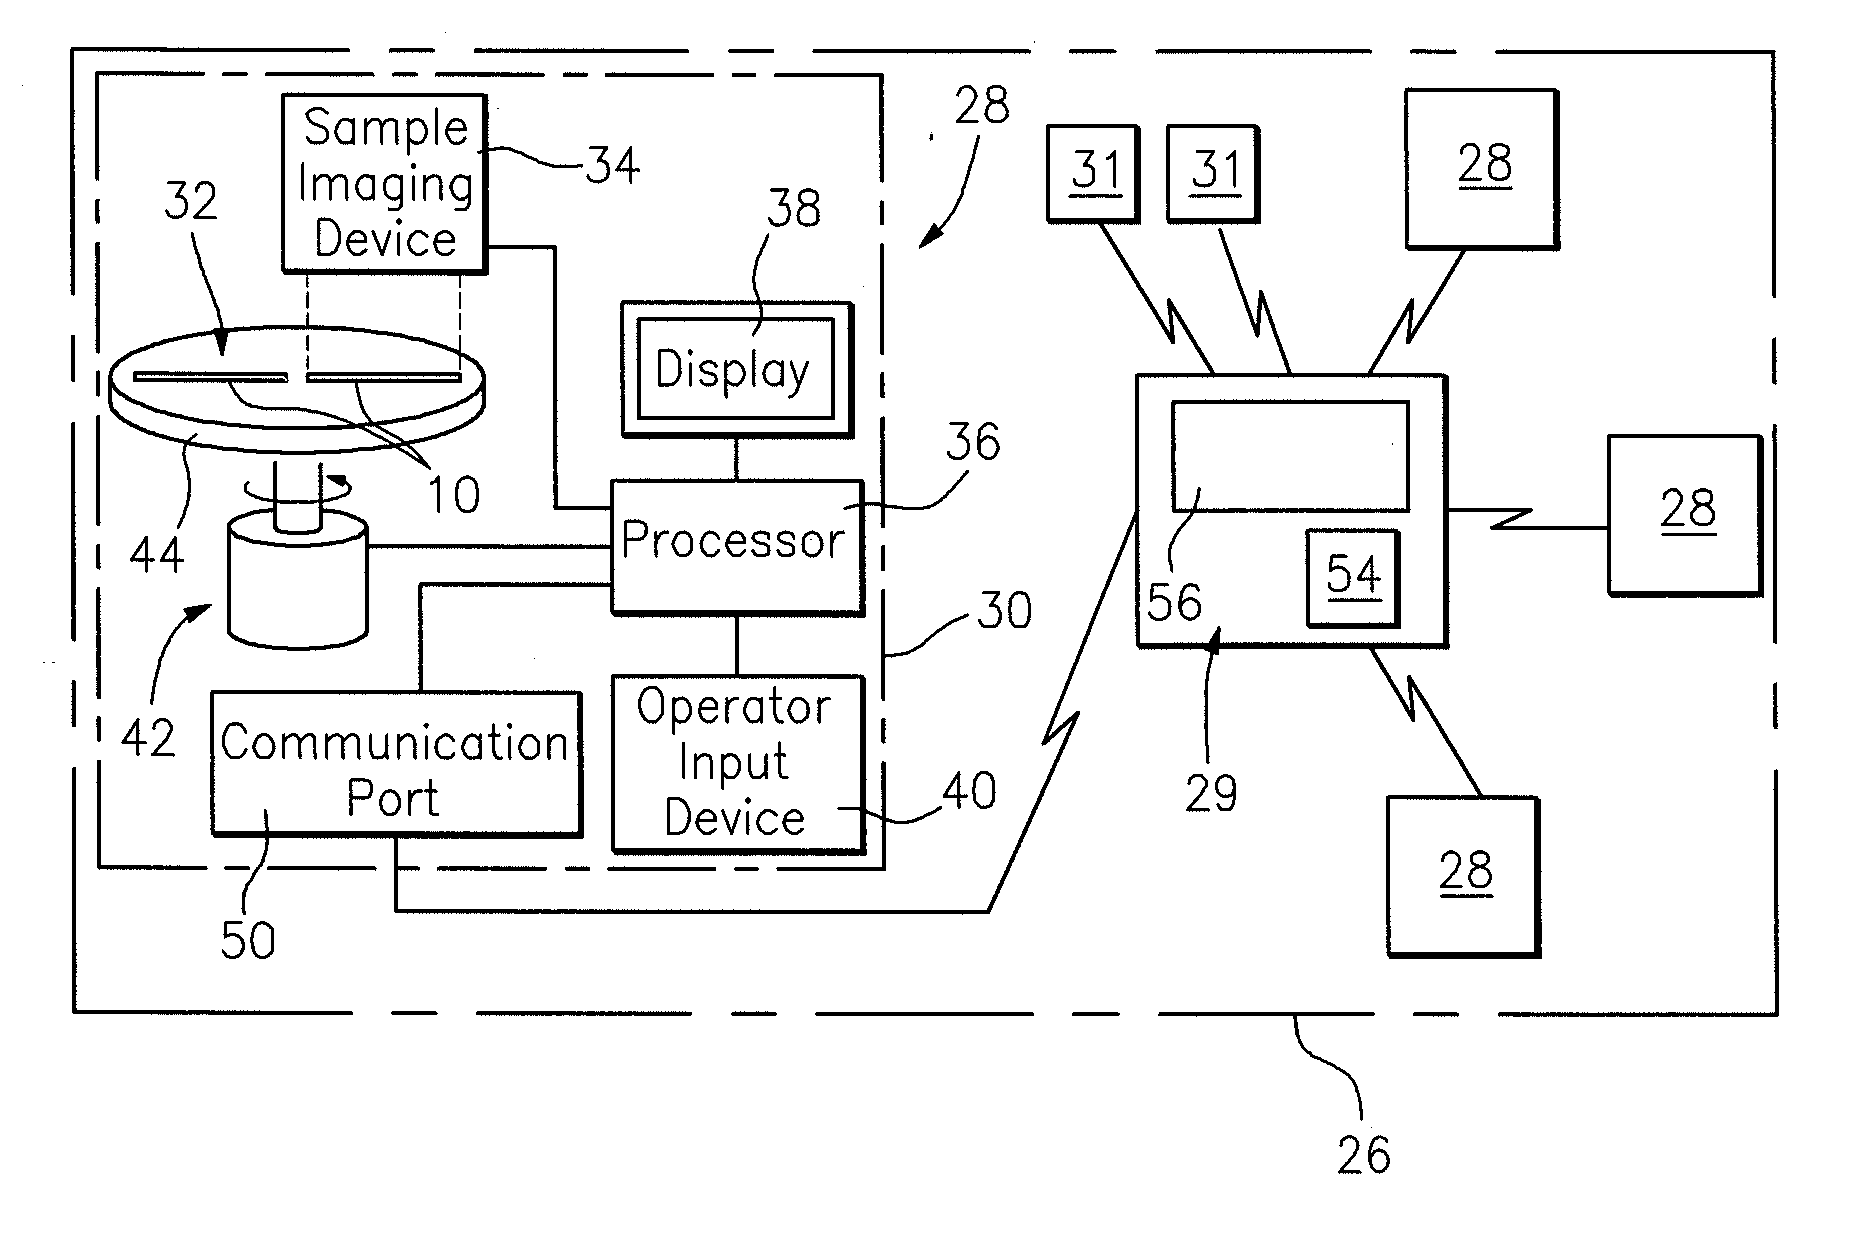 Method and apparatus for remotely performing hematologic analysis utilizing a transmitted image of a centrifuged analysis tube